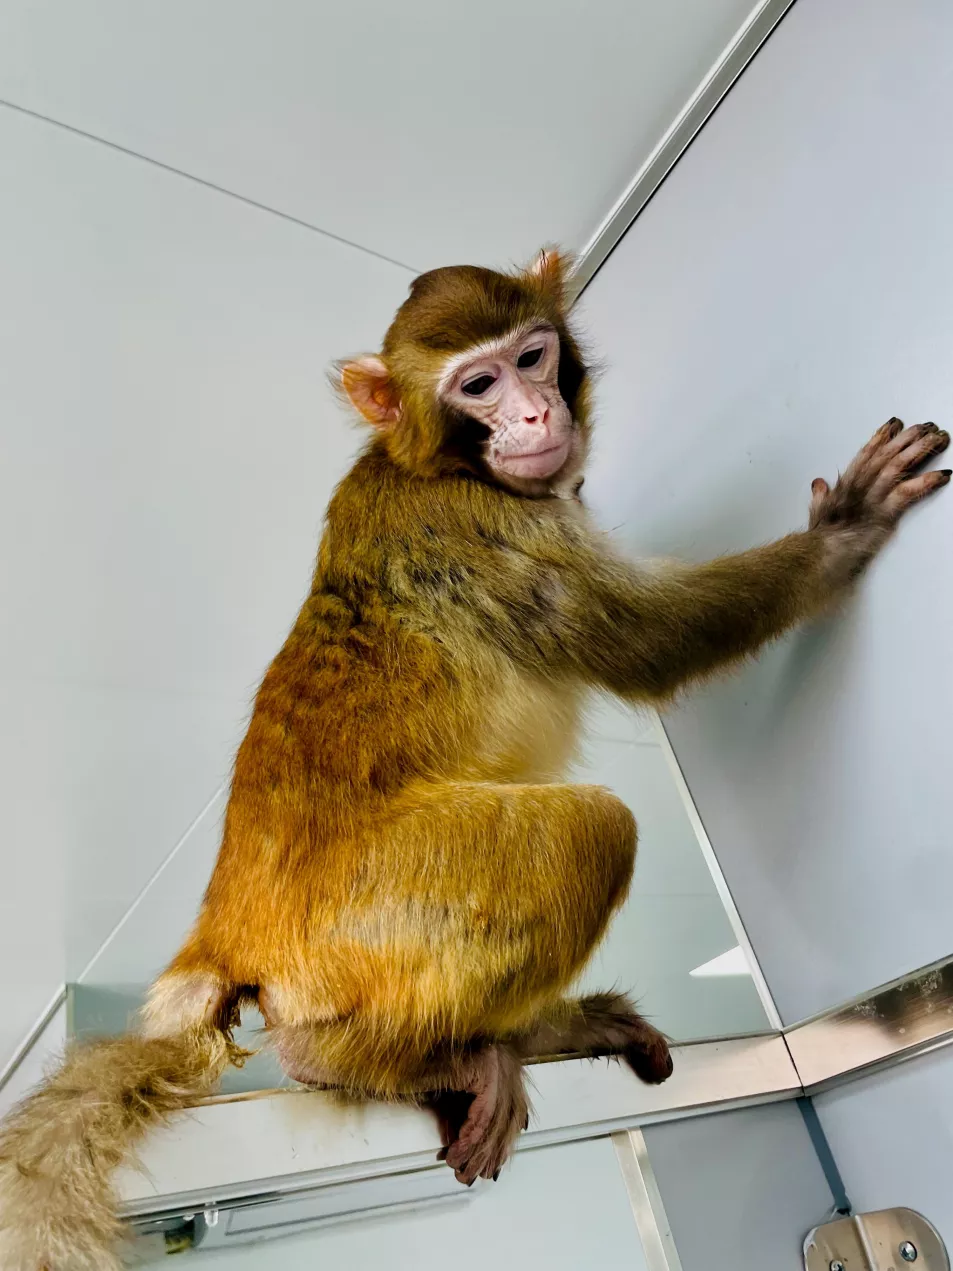 Scientists have named the cloned rhesus monkey ReTro 